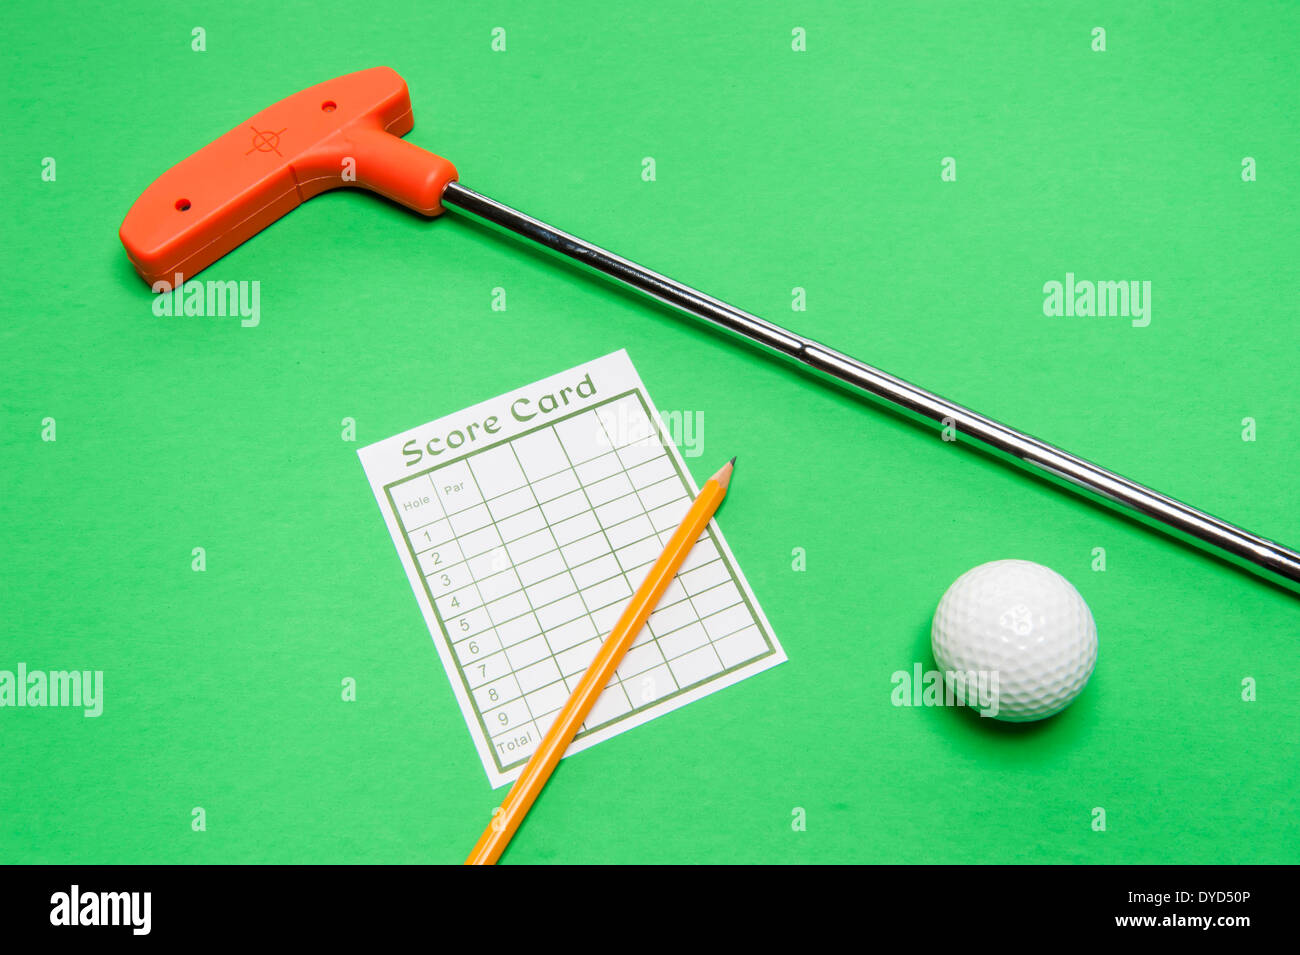 Mini golf club with score card, ball and pencil on green background Stock Photo